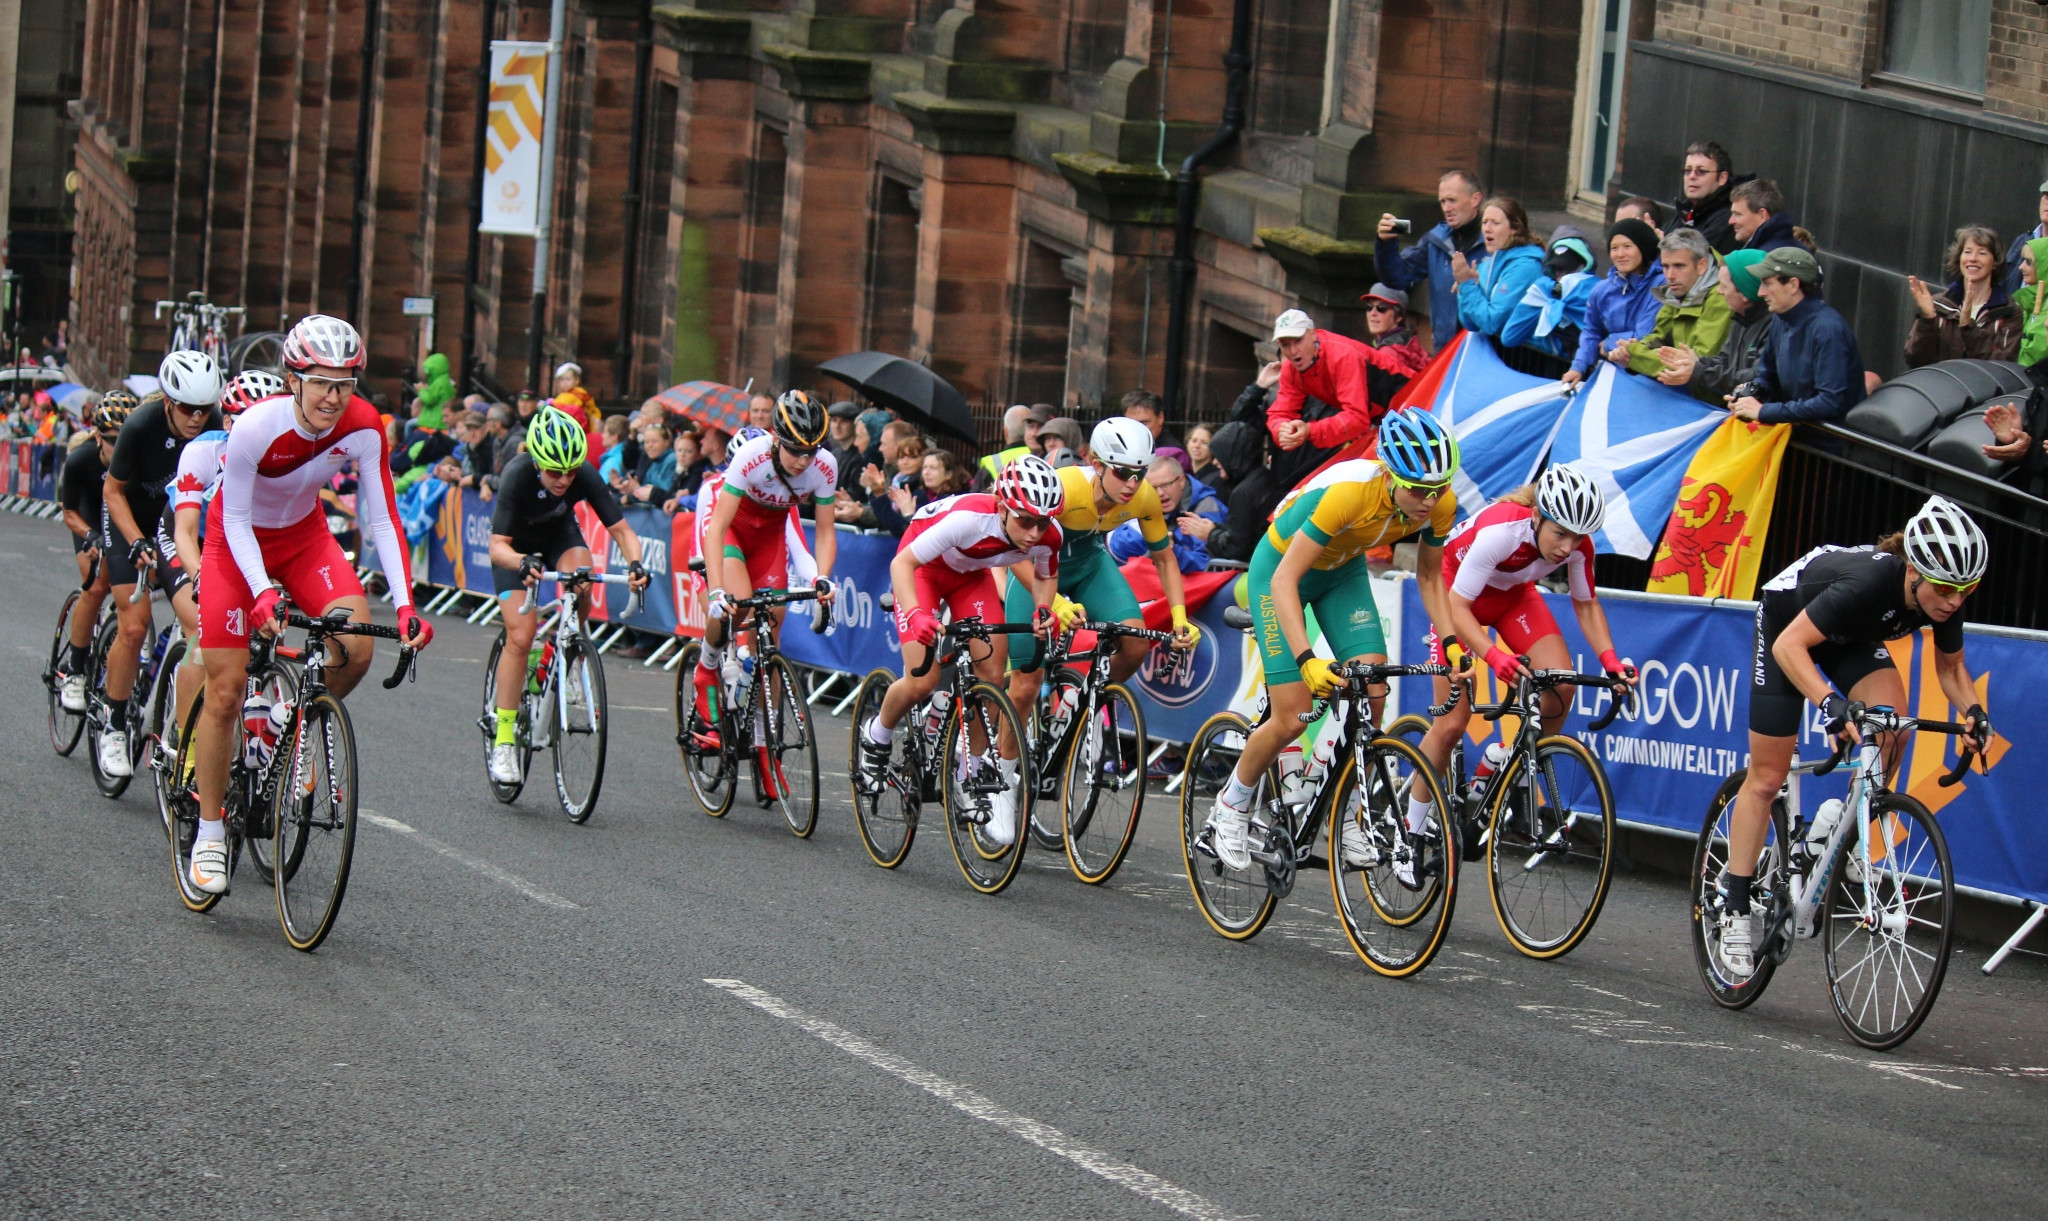 Cyclists competing at the Glasgow 2014 Commonwealth Games ©Getty Images